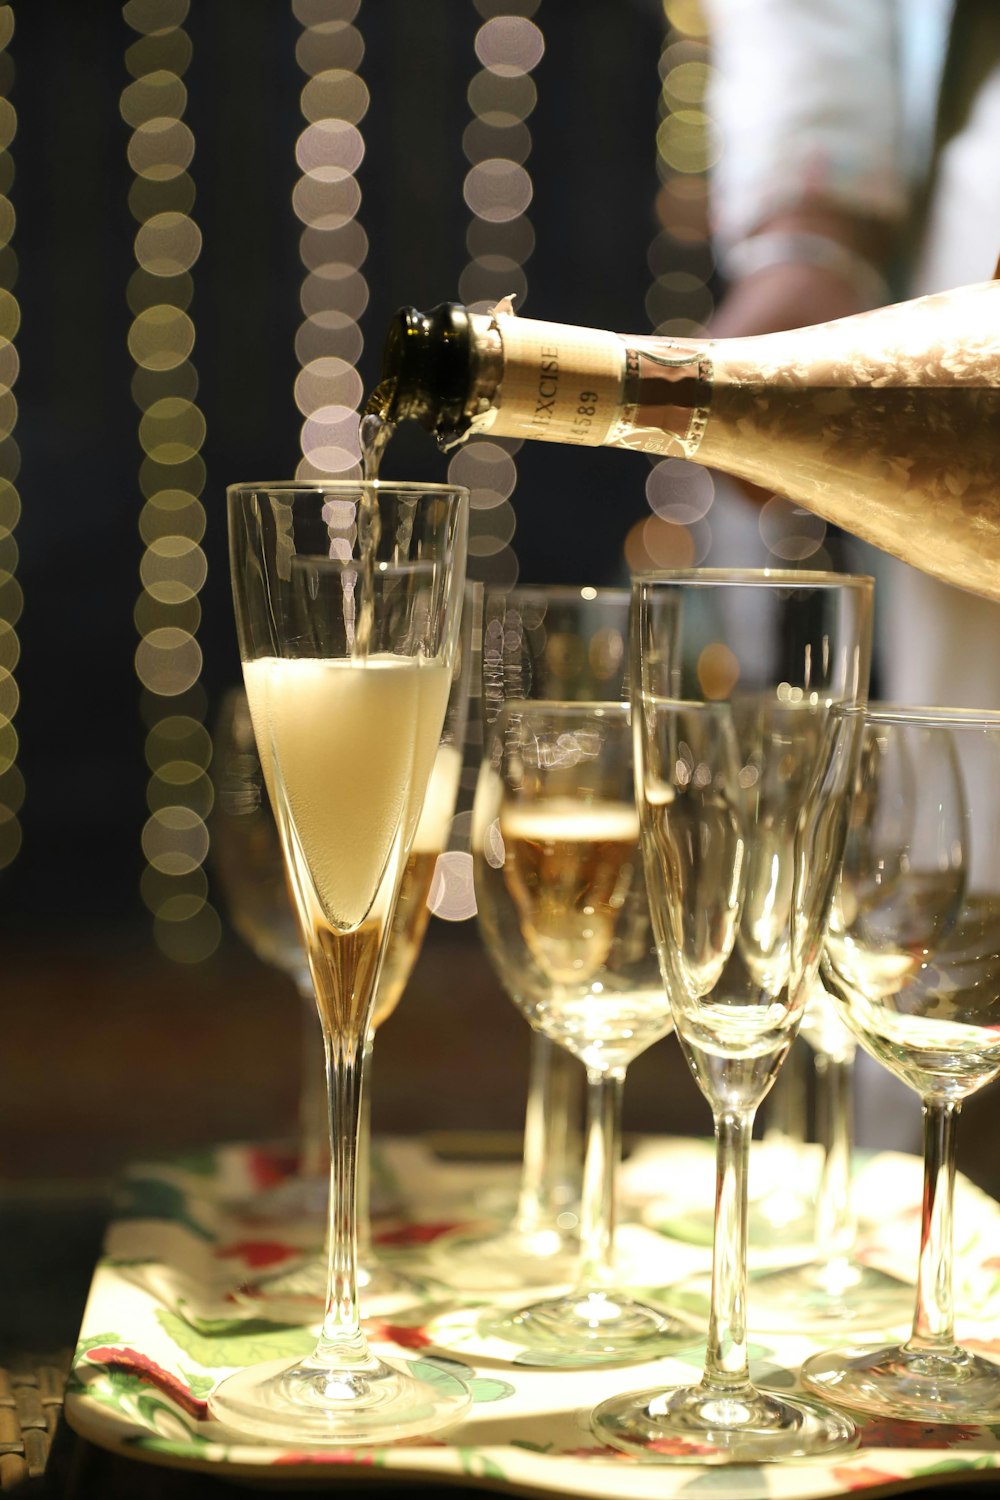 a bottle of champagne being poured into wine glasses